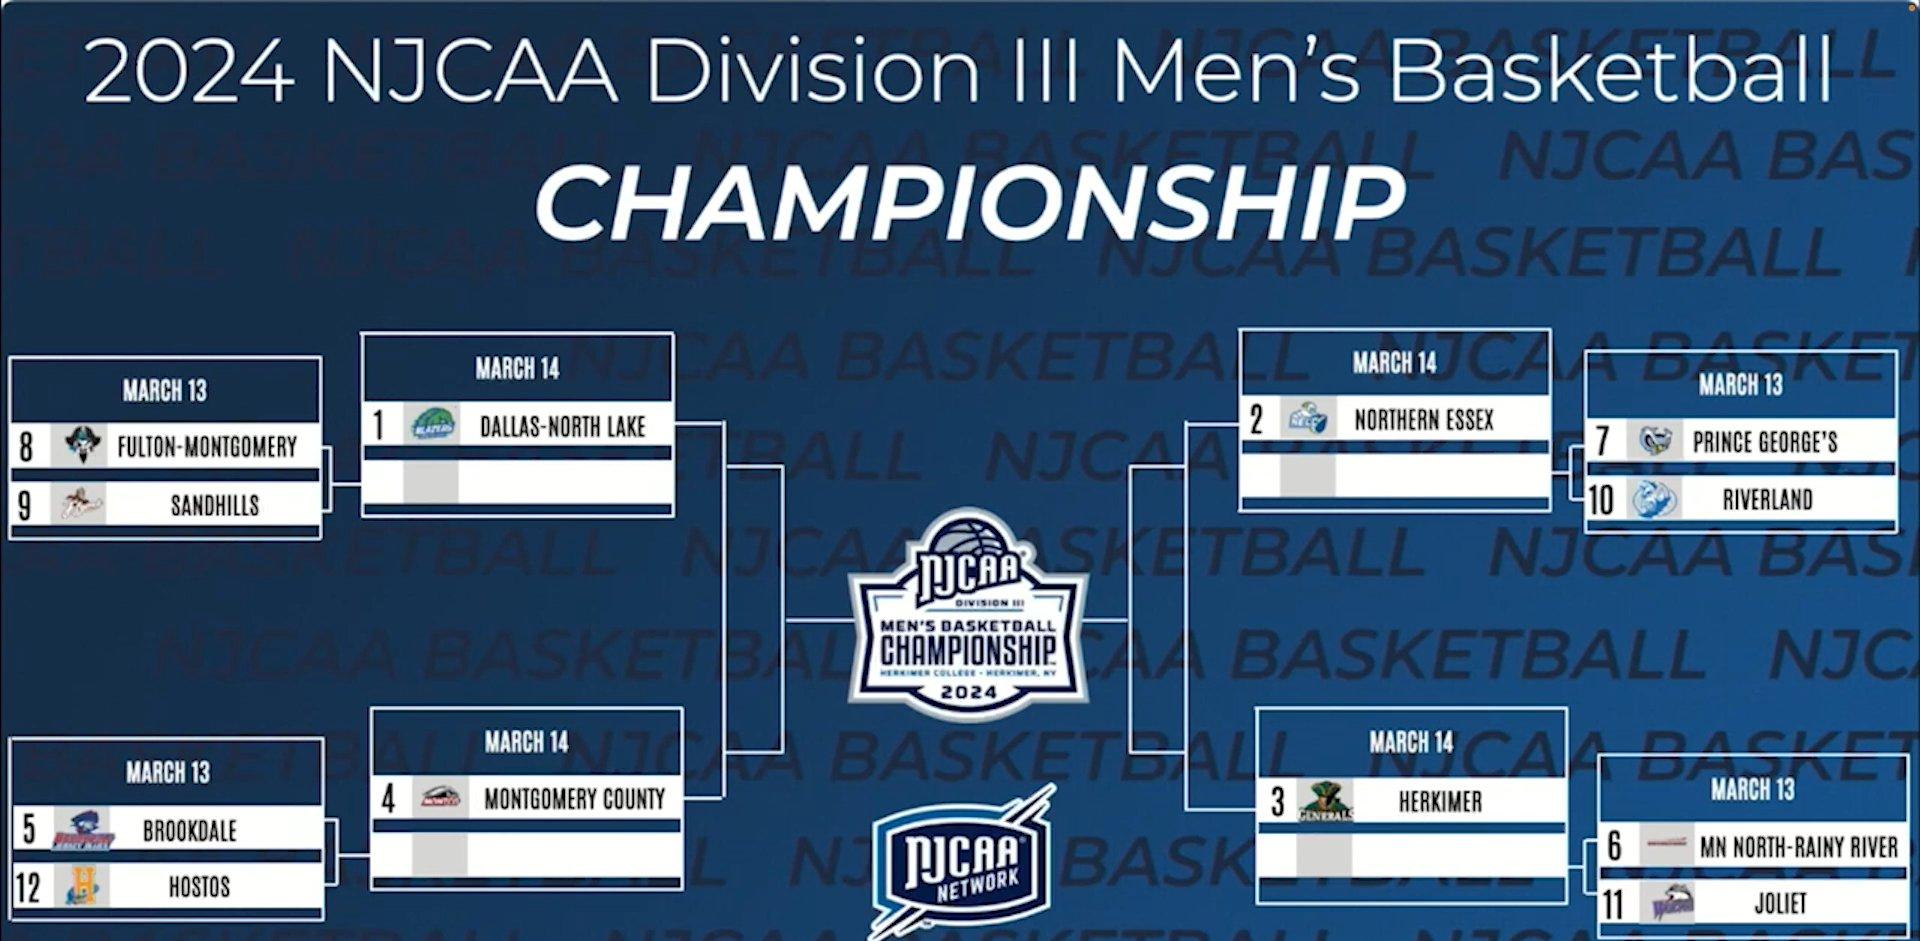 Herkimer Men's Basketball No. 3 Seed in National Tournament